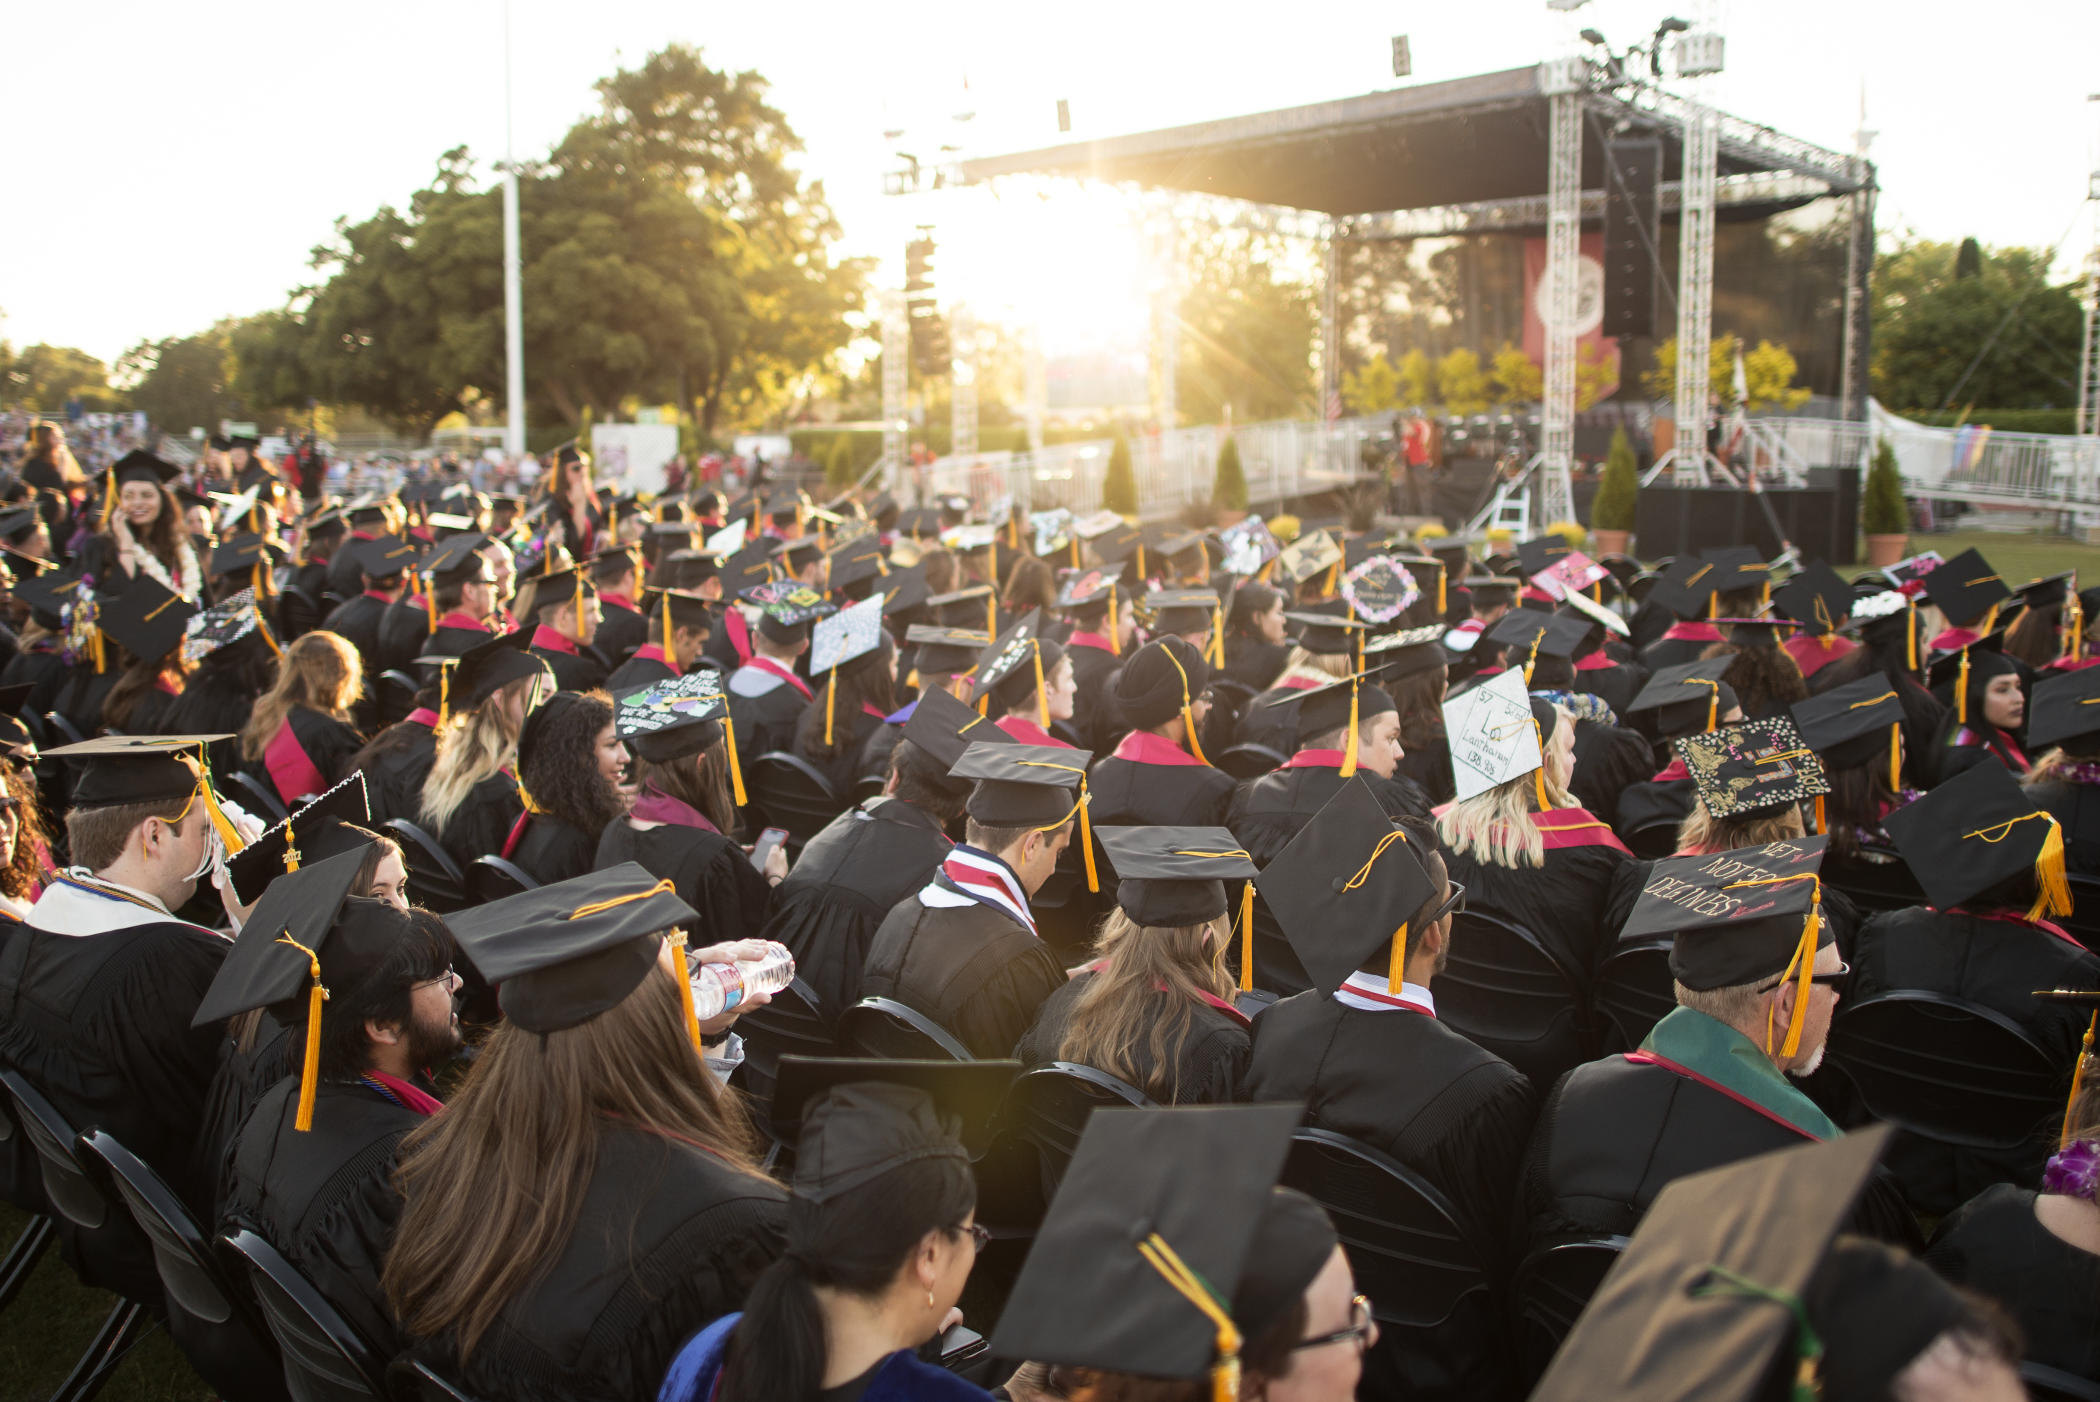 Graduates in cap and gown sit in anticipation of Commencement as the sun sets behind the stage